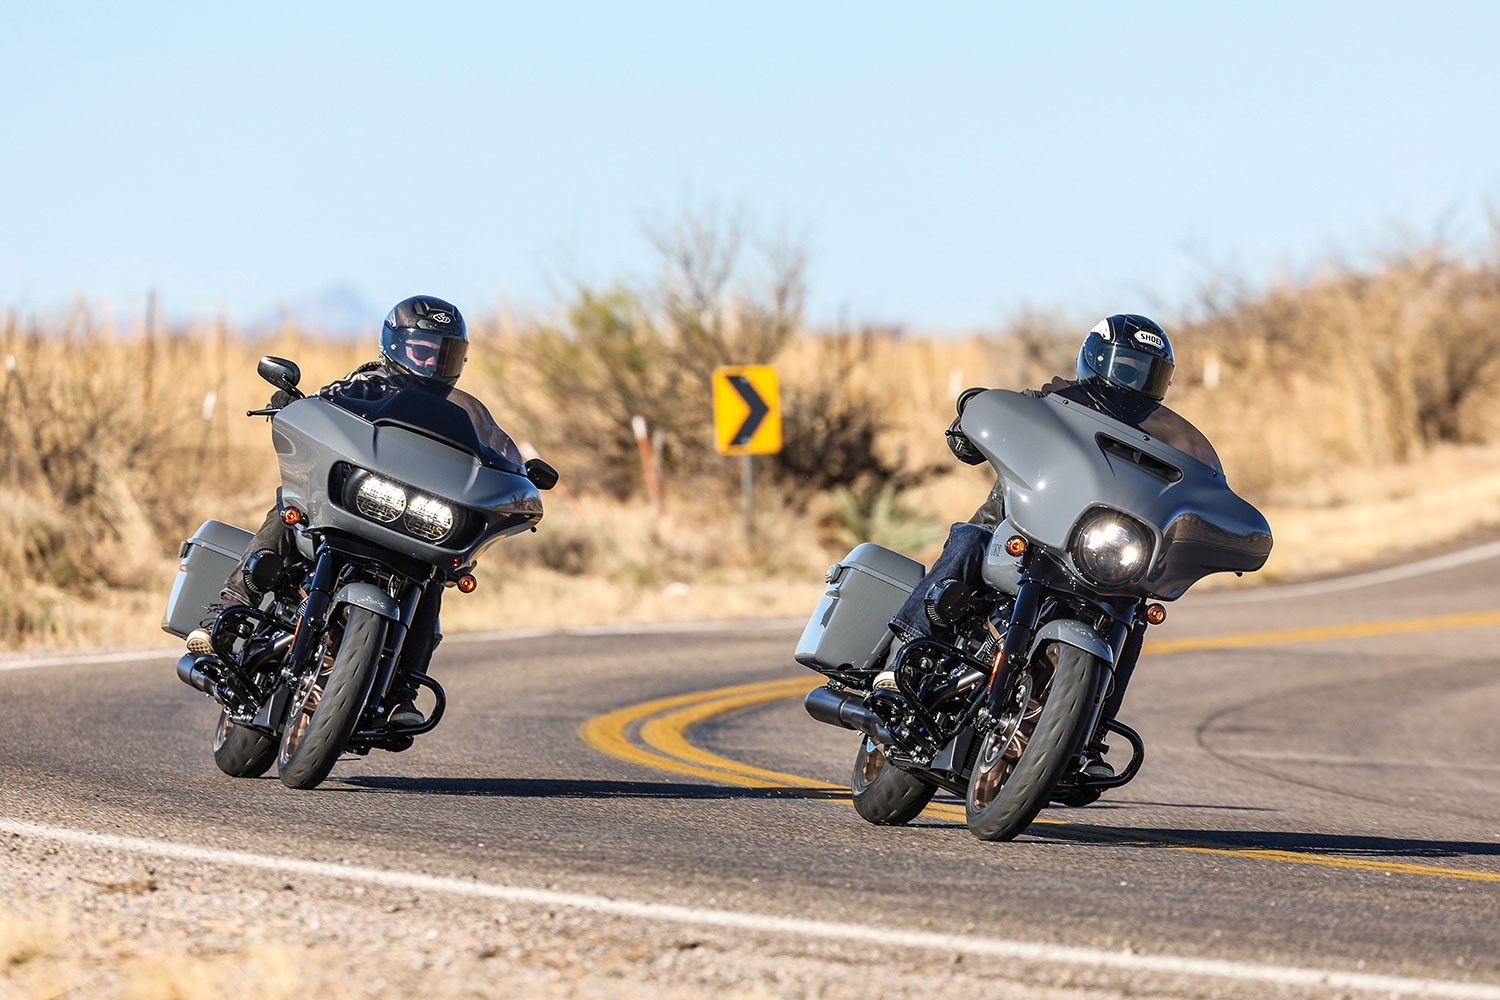 2022 Harley-Davidson Road Glide ST and Street Glide ST | Review